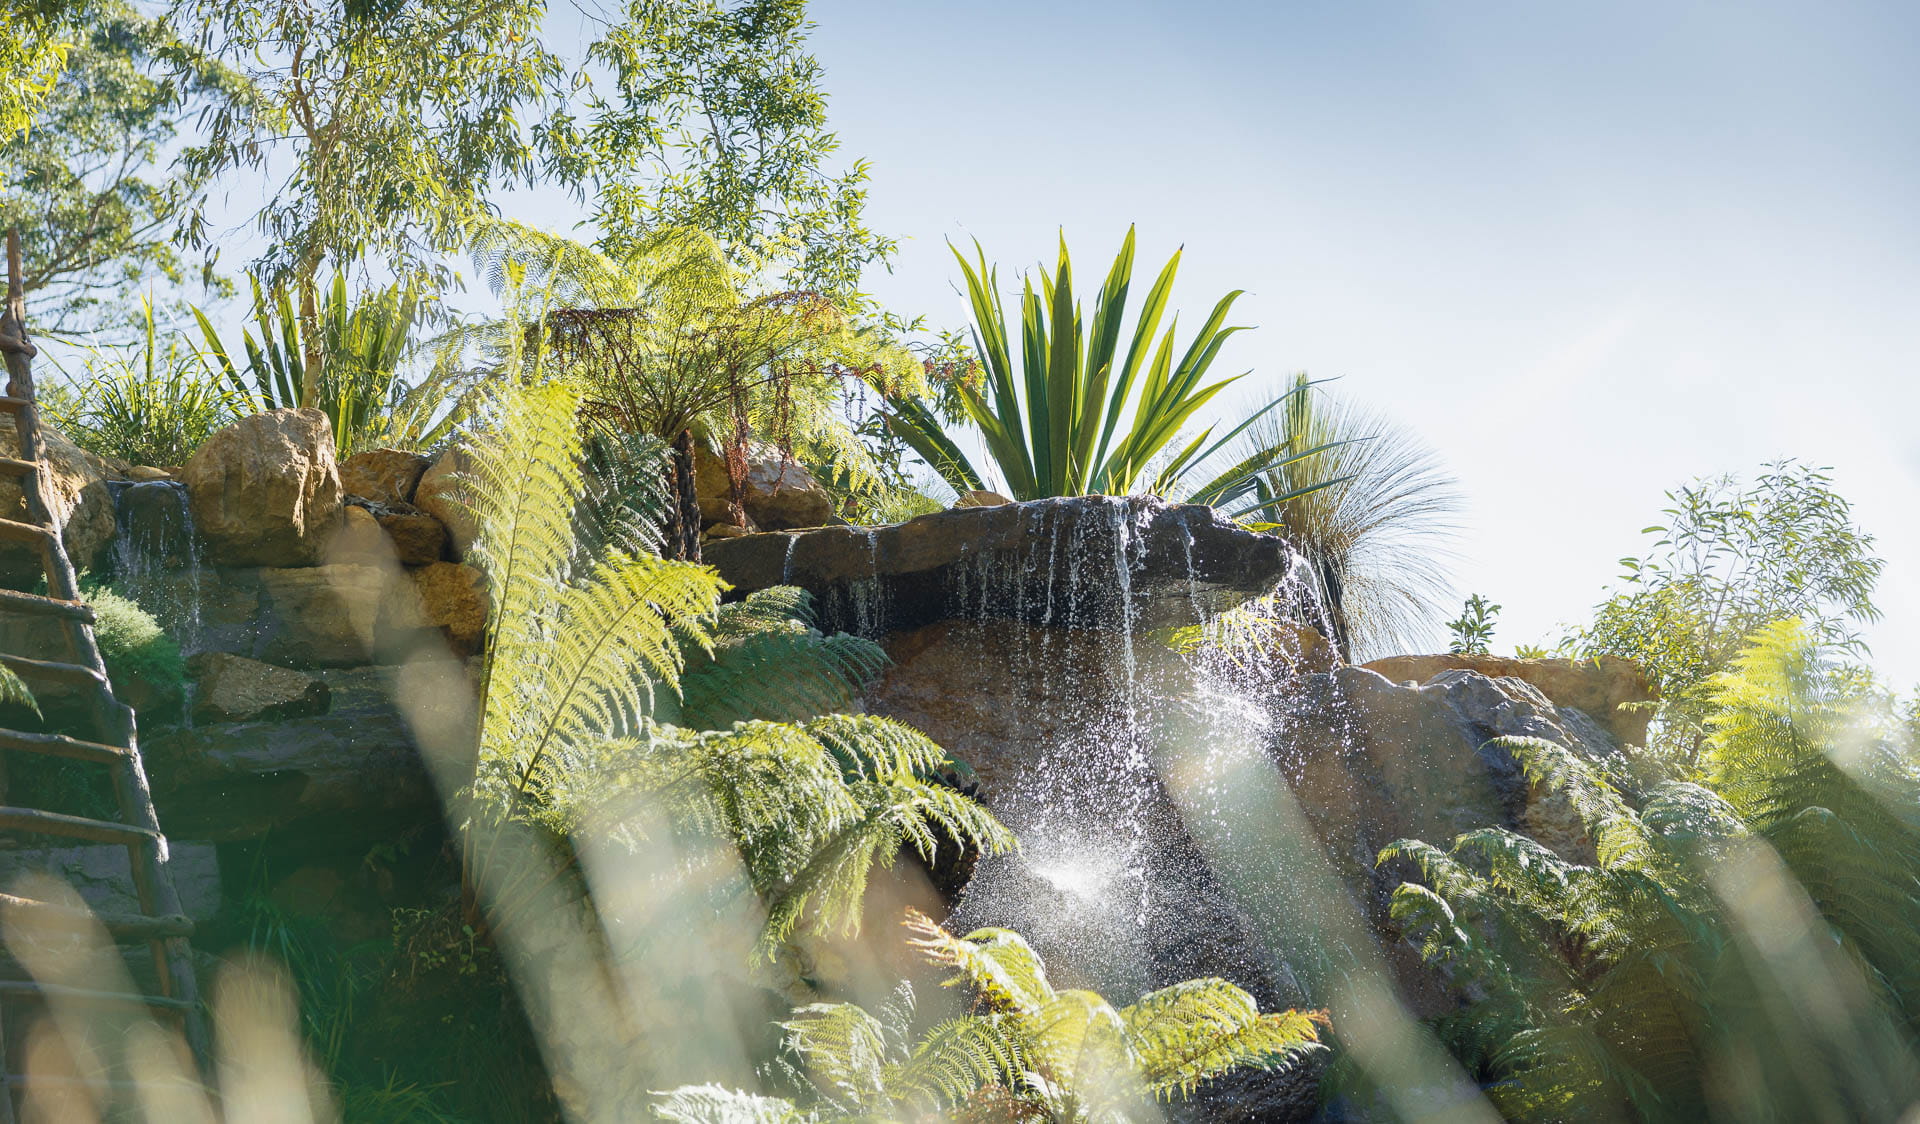 A landscaped garden with winding paths, a large pond and filled with mature native Australian plants. 